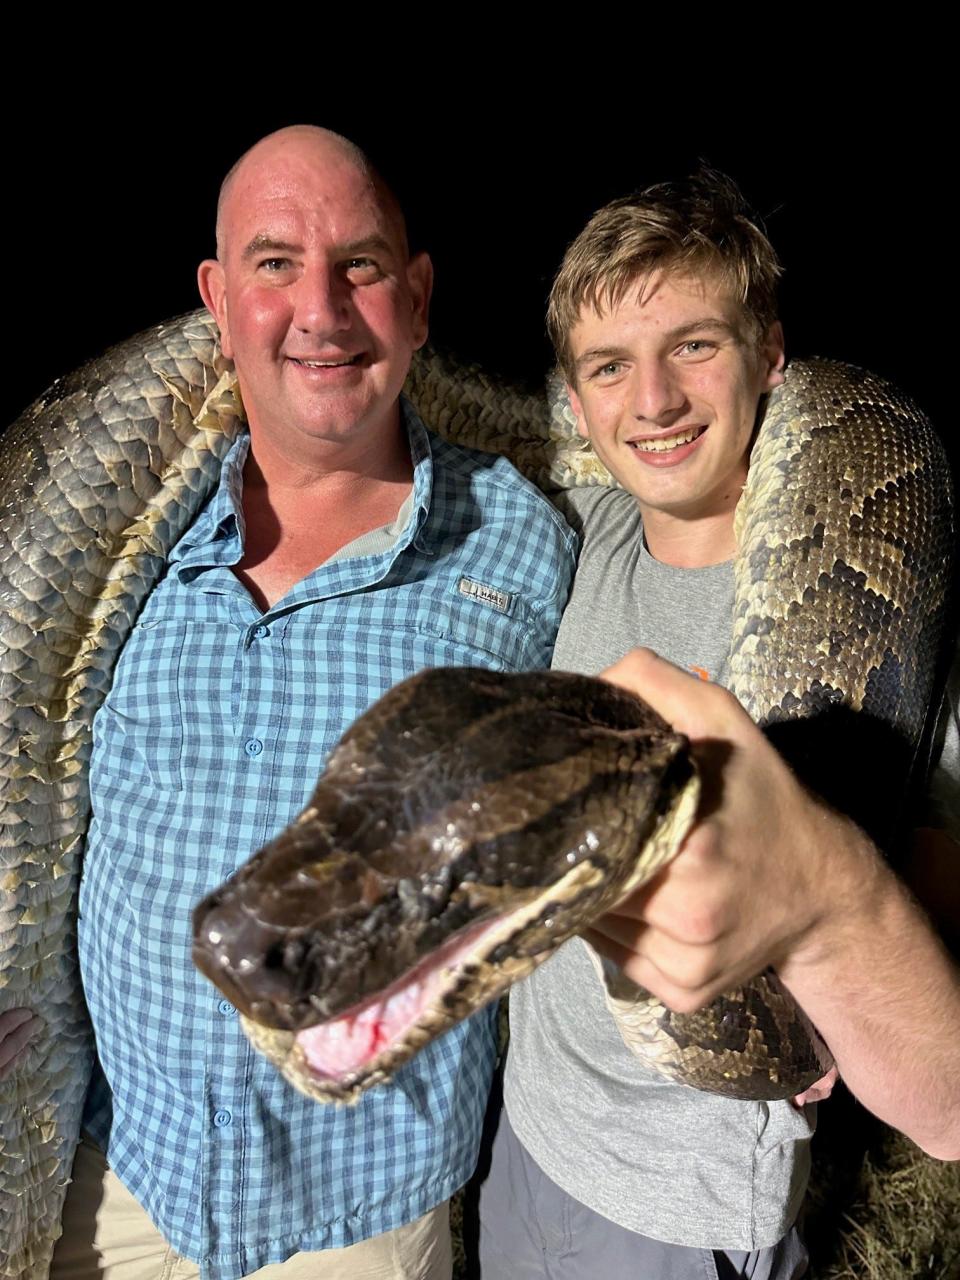 Mike Elfenbein, left, poses with his son, Cole, after they caught a 198-pound Burmese python in Big Cypress National Preserve. It is the second heaviest python every caught in Florida.